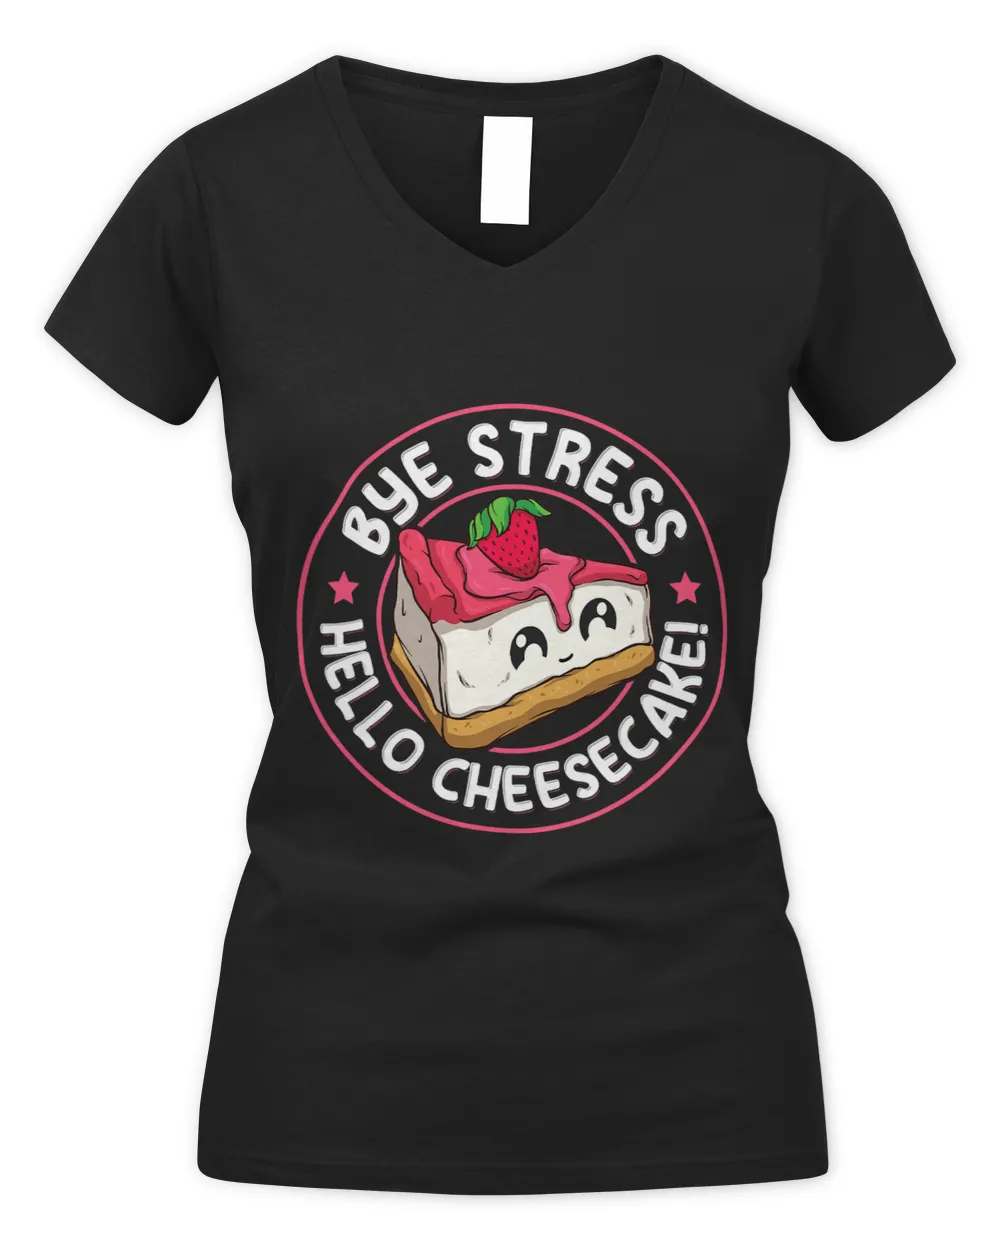 Bye Stress Hello Cheesecake Design for a Cheesecake Lover